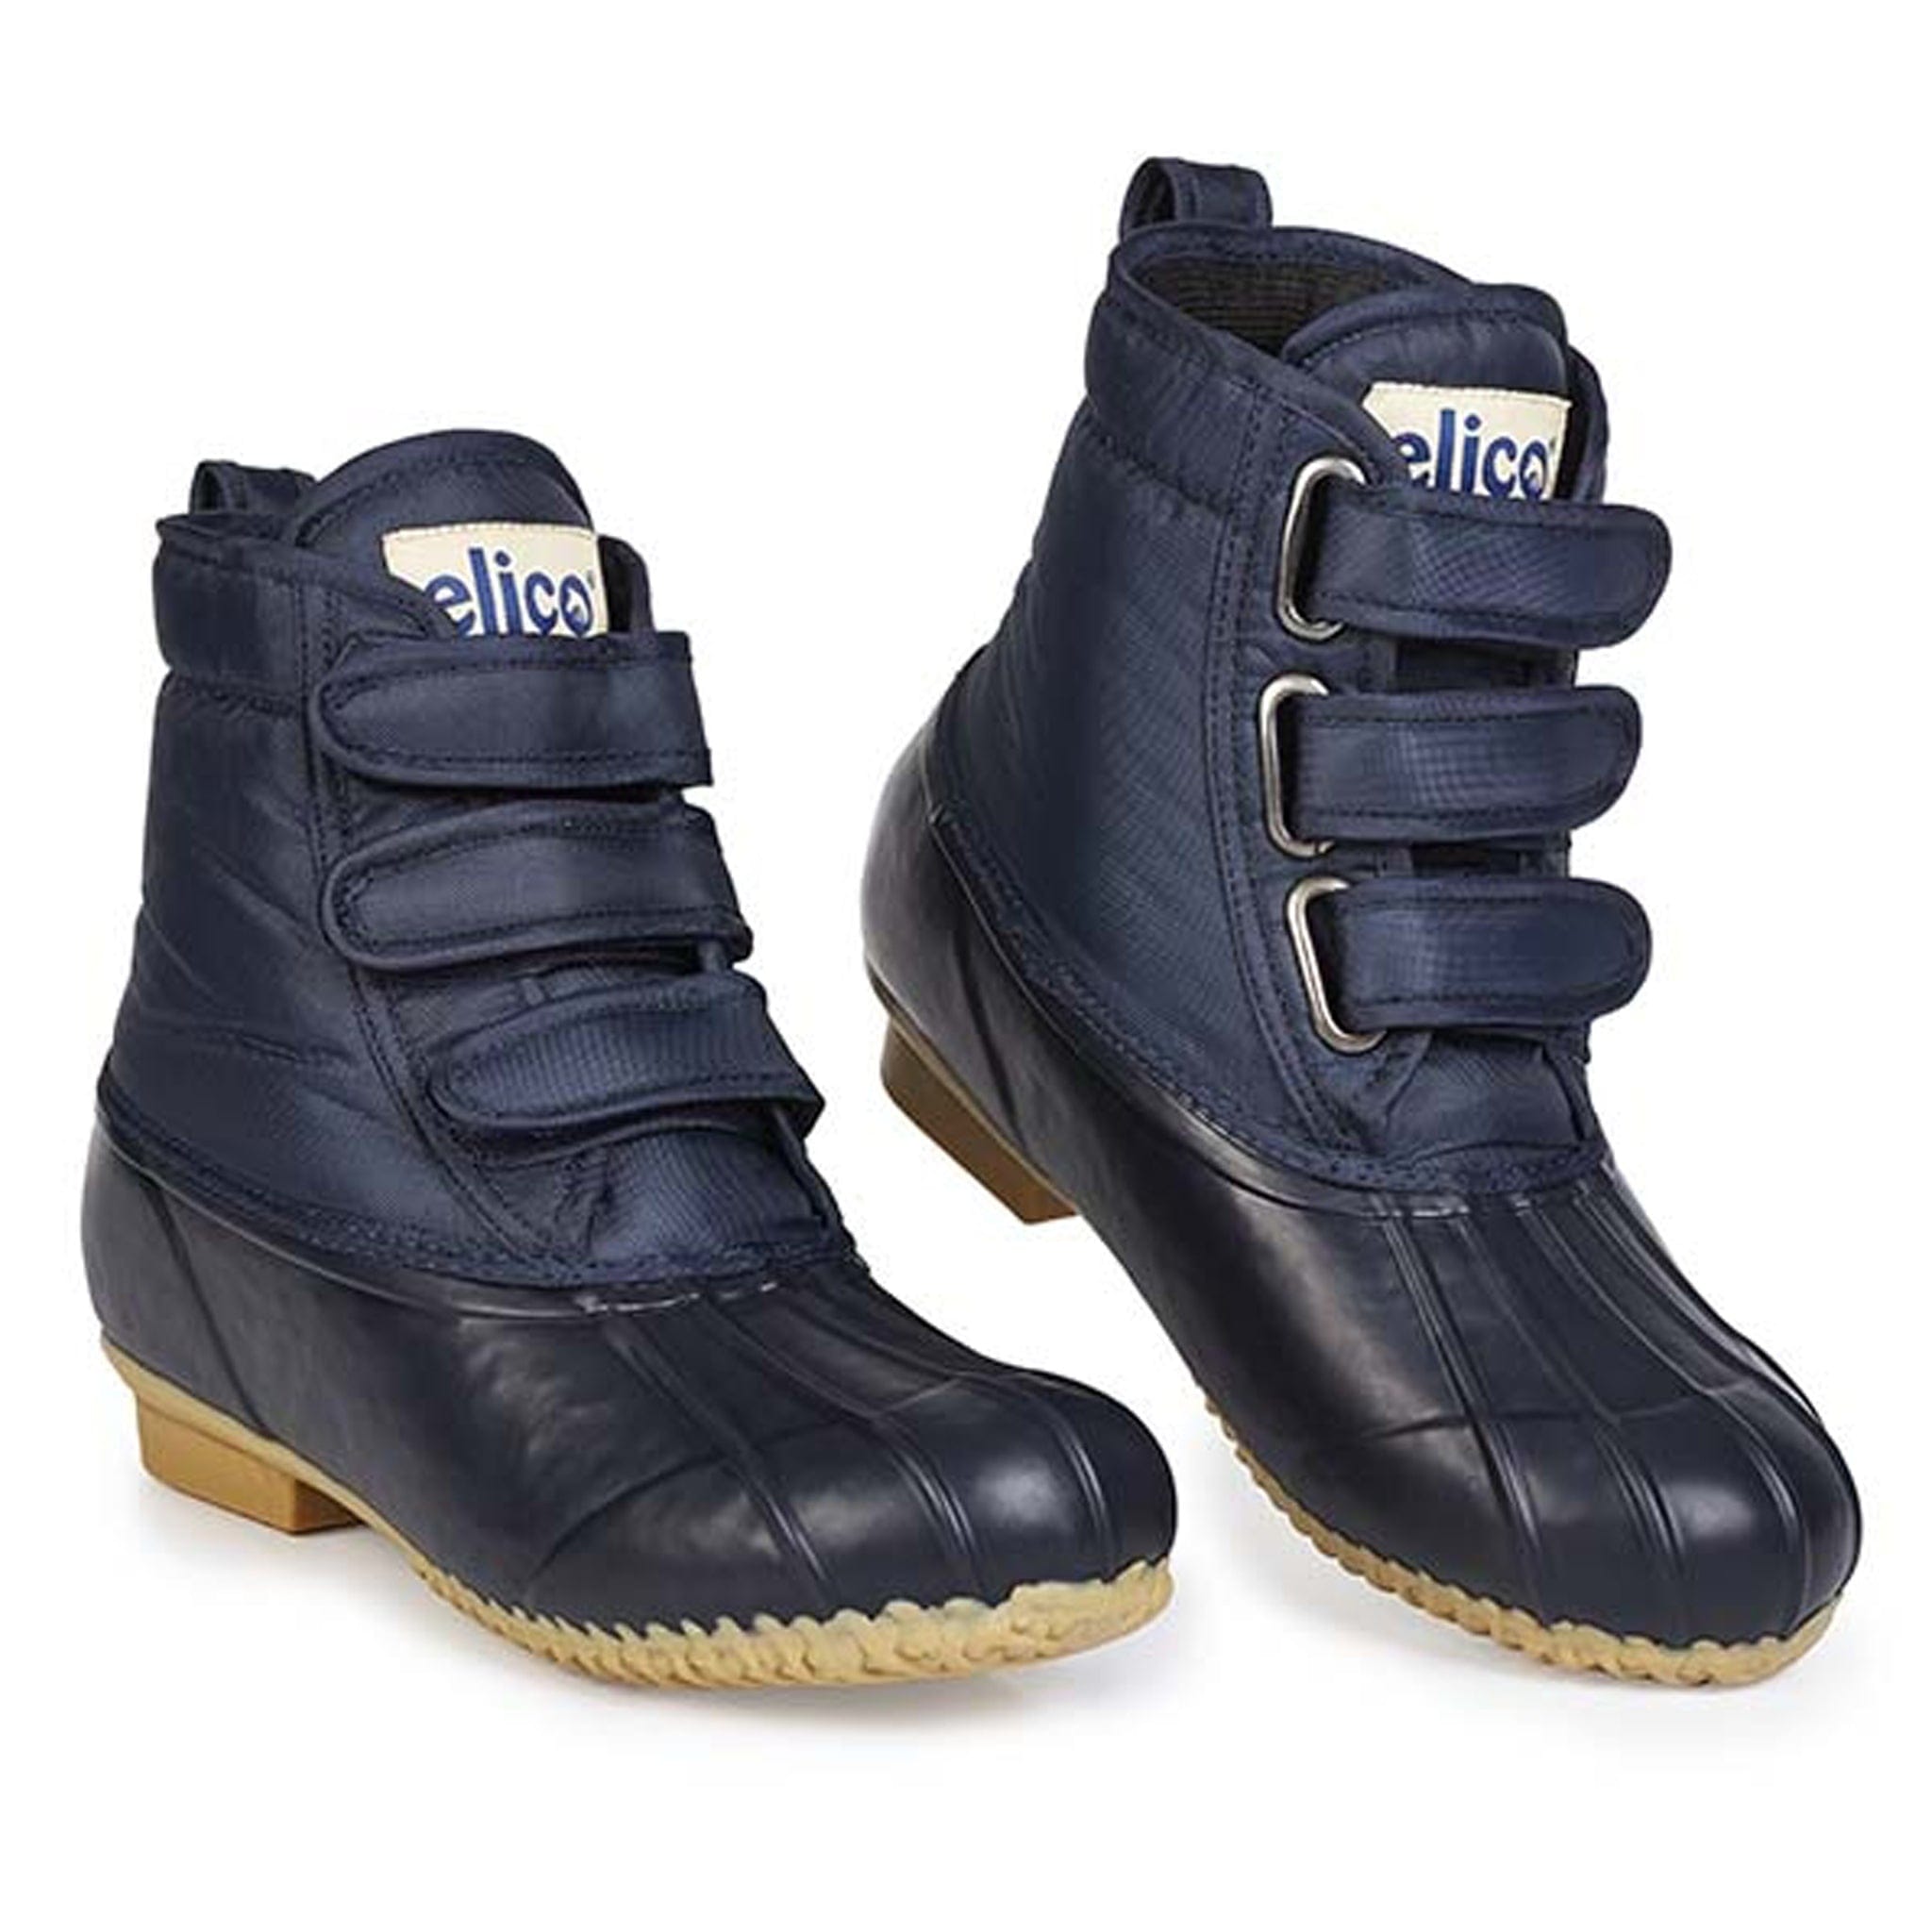 Elico Airedale Short Yard Boots Navy